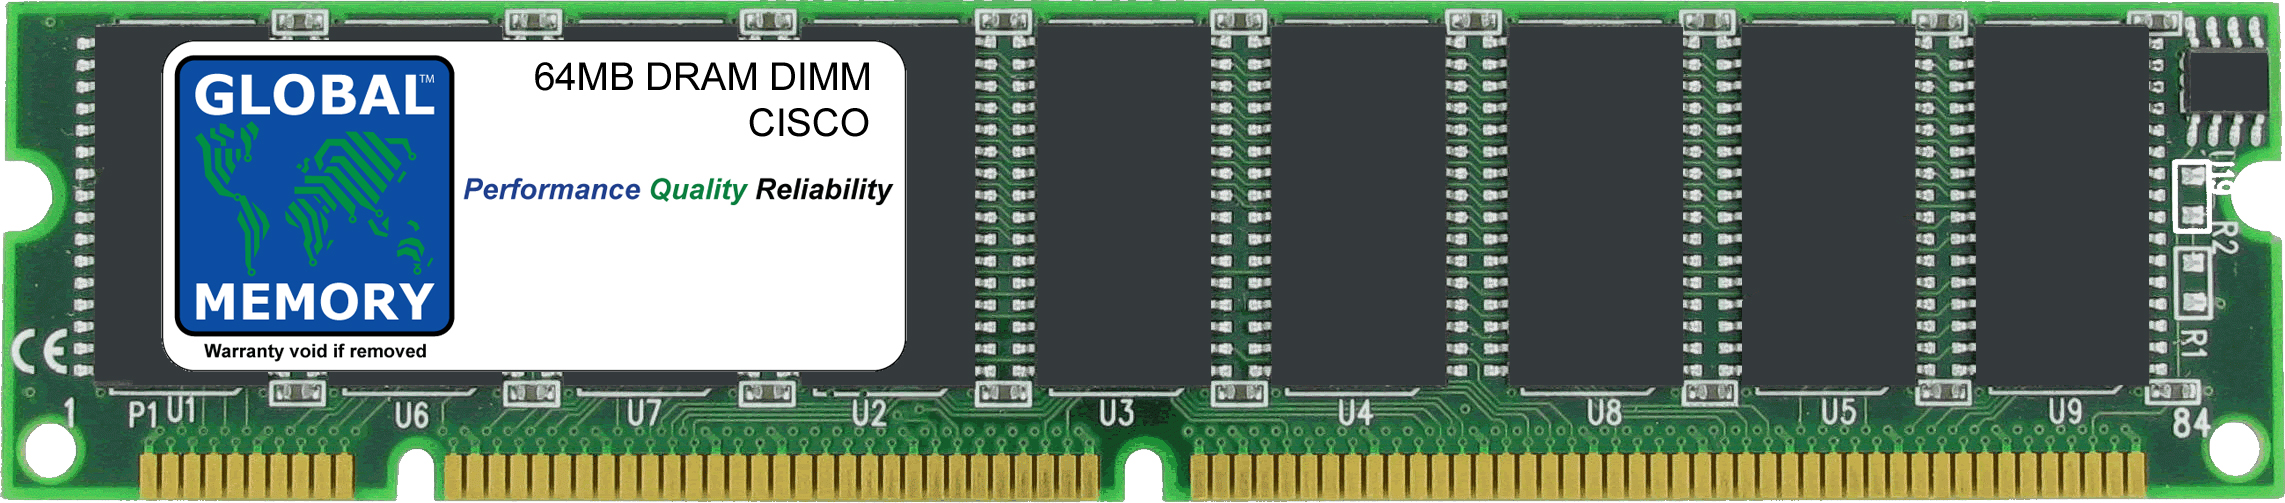 64MB DRAM DIMM MEMORY RAM FOR CISCO 7500 SERIES ROUTERS ROUTE SWITCH PROCESSOR 8 (MEM-RSP8-64M)